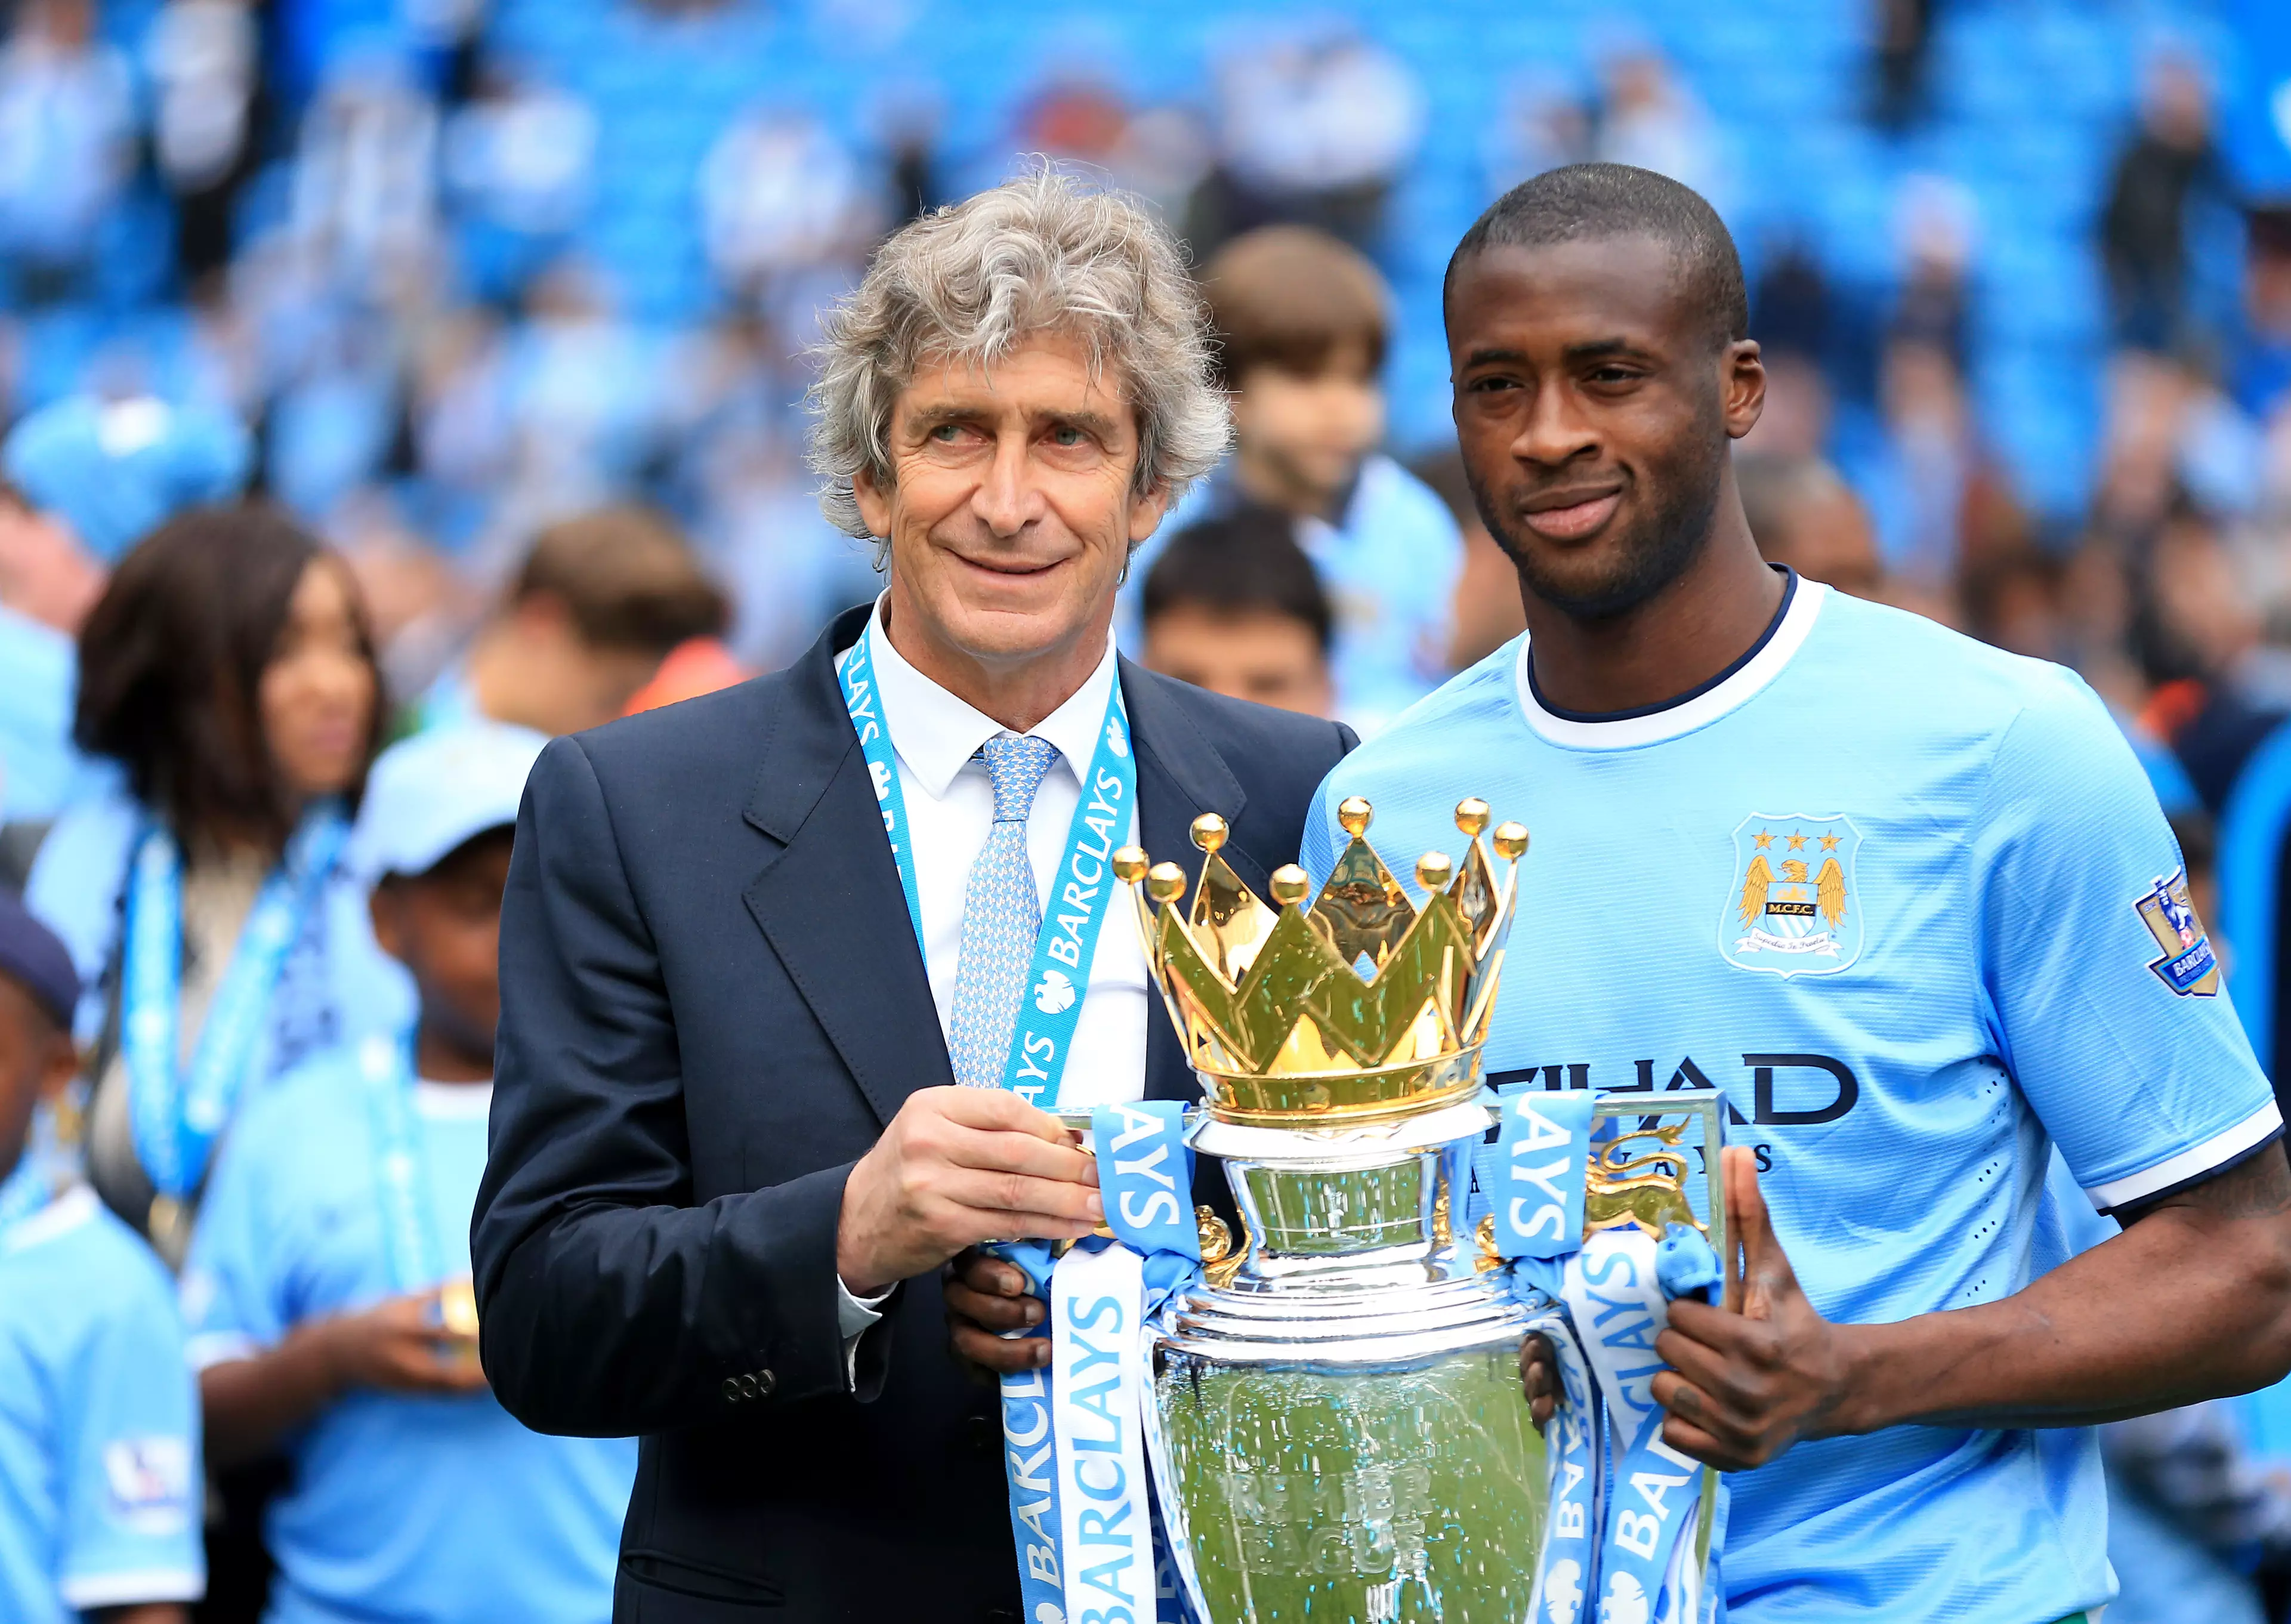 Toure was influential for much of City's success. Image: PA Images